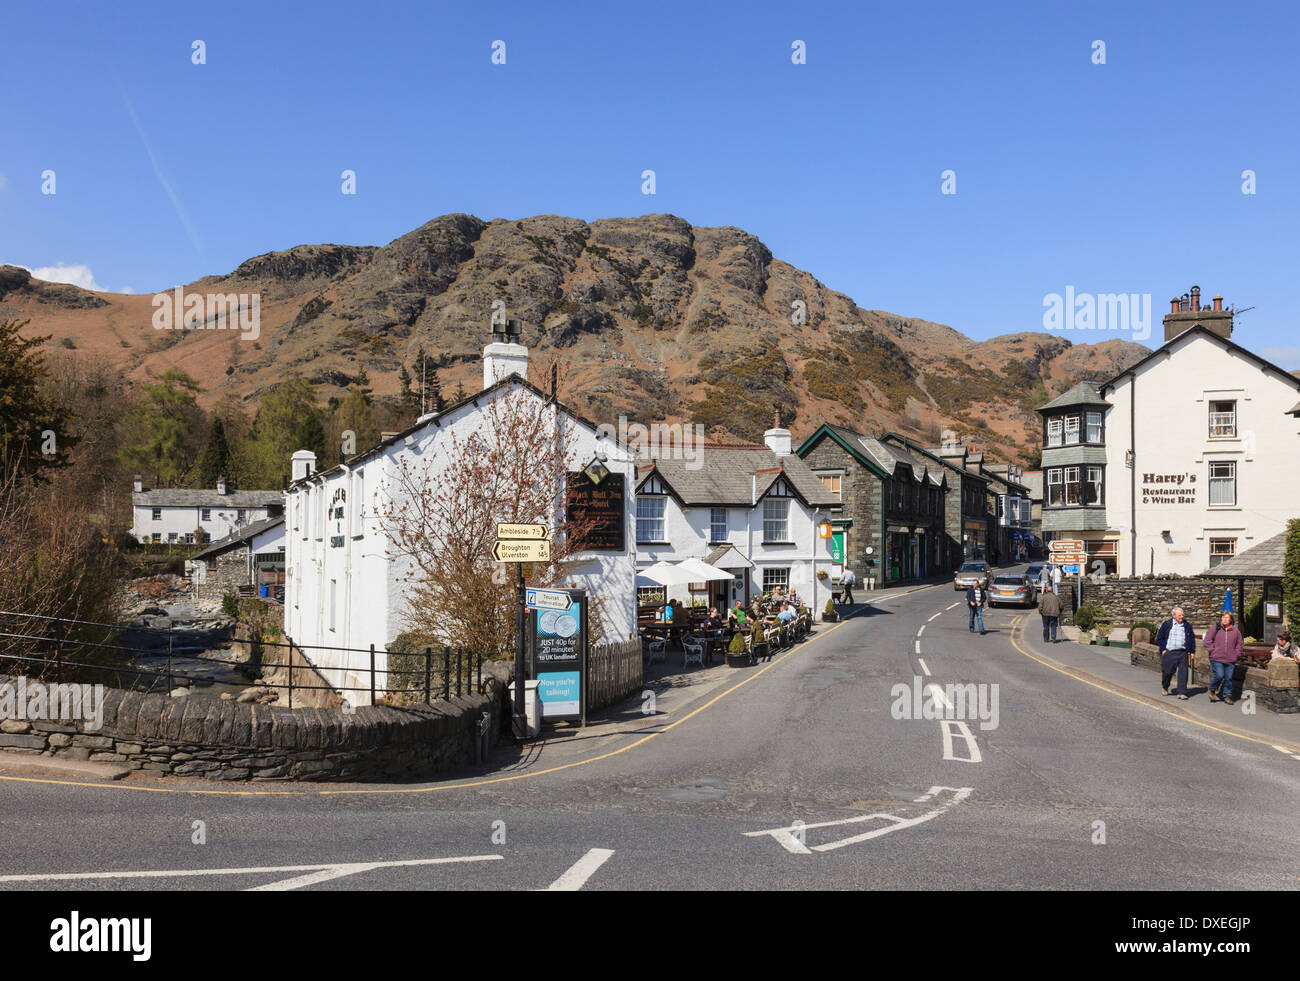 The Black Bull Inn hotel and Lakeland village centre in Lake District National Park. Coniston, Cumbria, England, UK, Britain Stock Photo